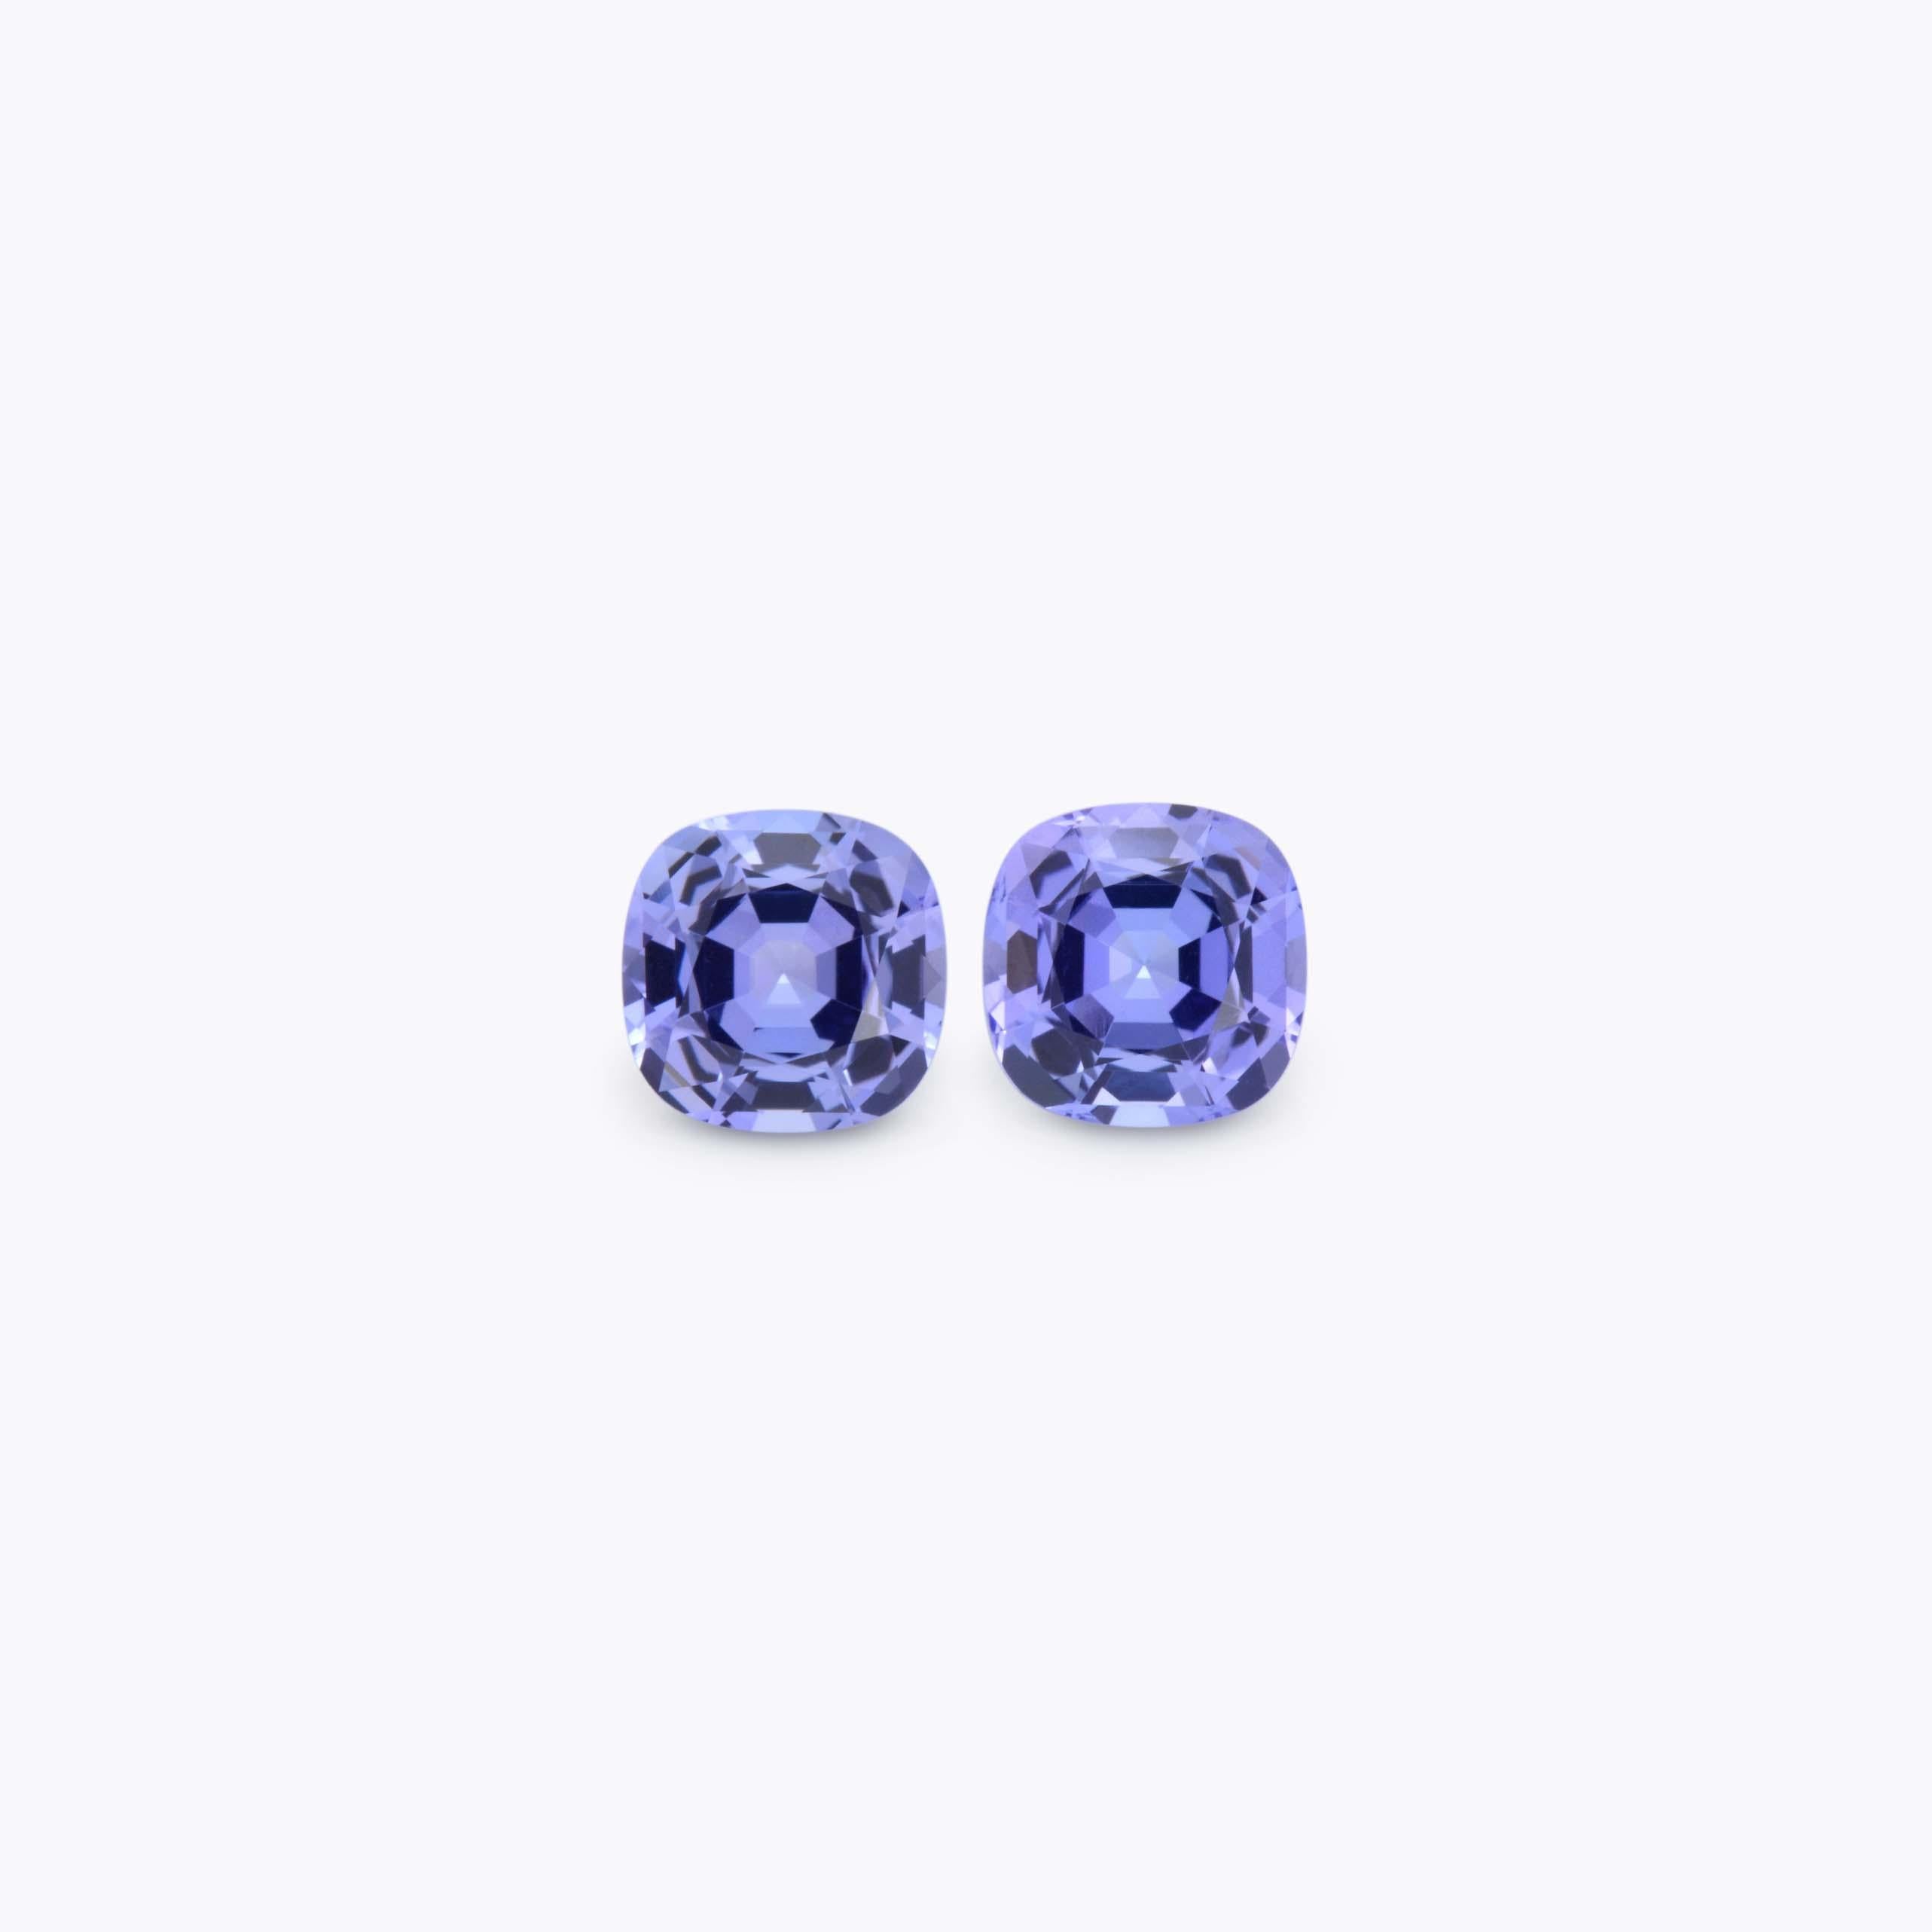 Lively Tanzanite cushion pair totaling 4.04 carats, offered unmounted for a spectacular custom pair of earrings.
Dimensions: 7.8 x 7.8 x 5.0 mm.
Returns are accepted and paid by us within 7 days of delivery.
We offer supreme custom jewelry work upon